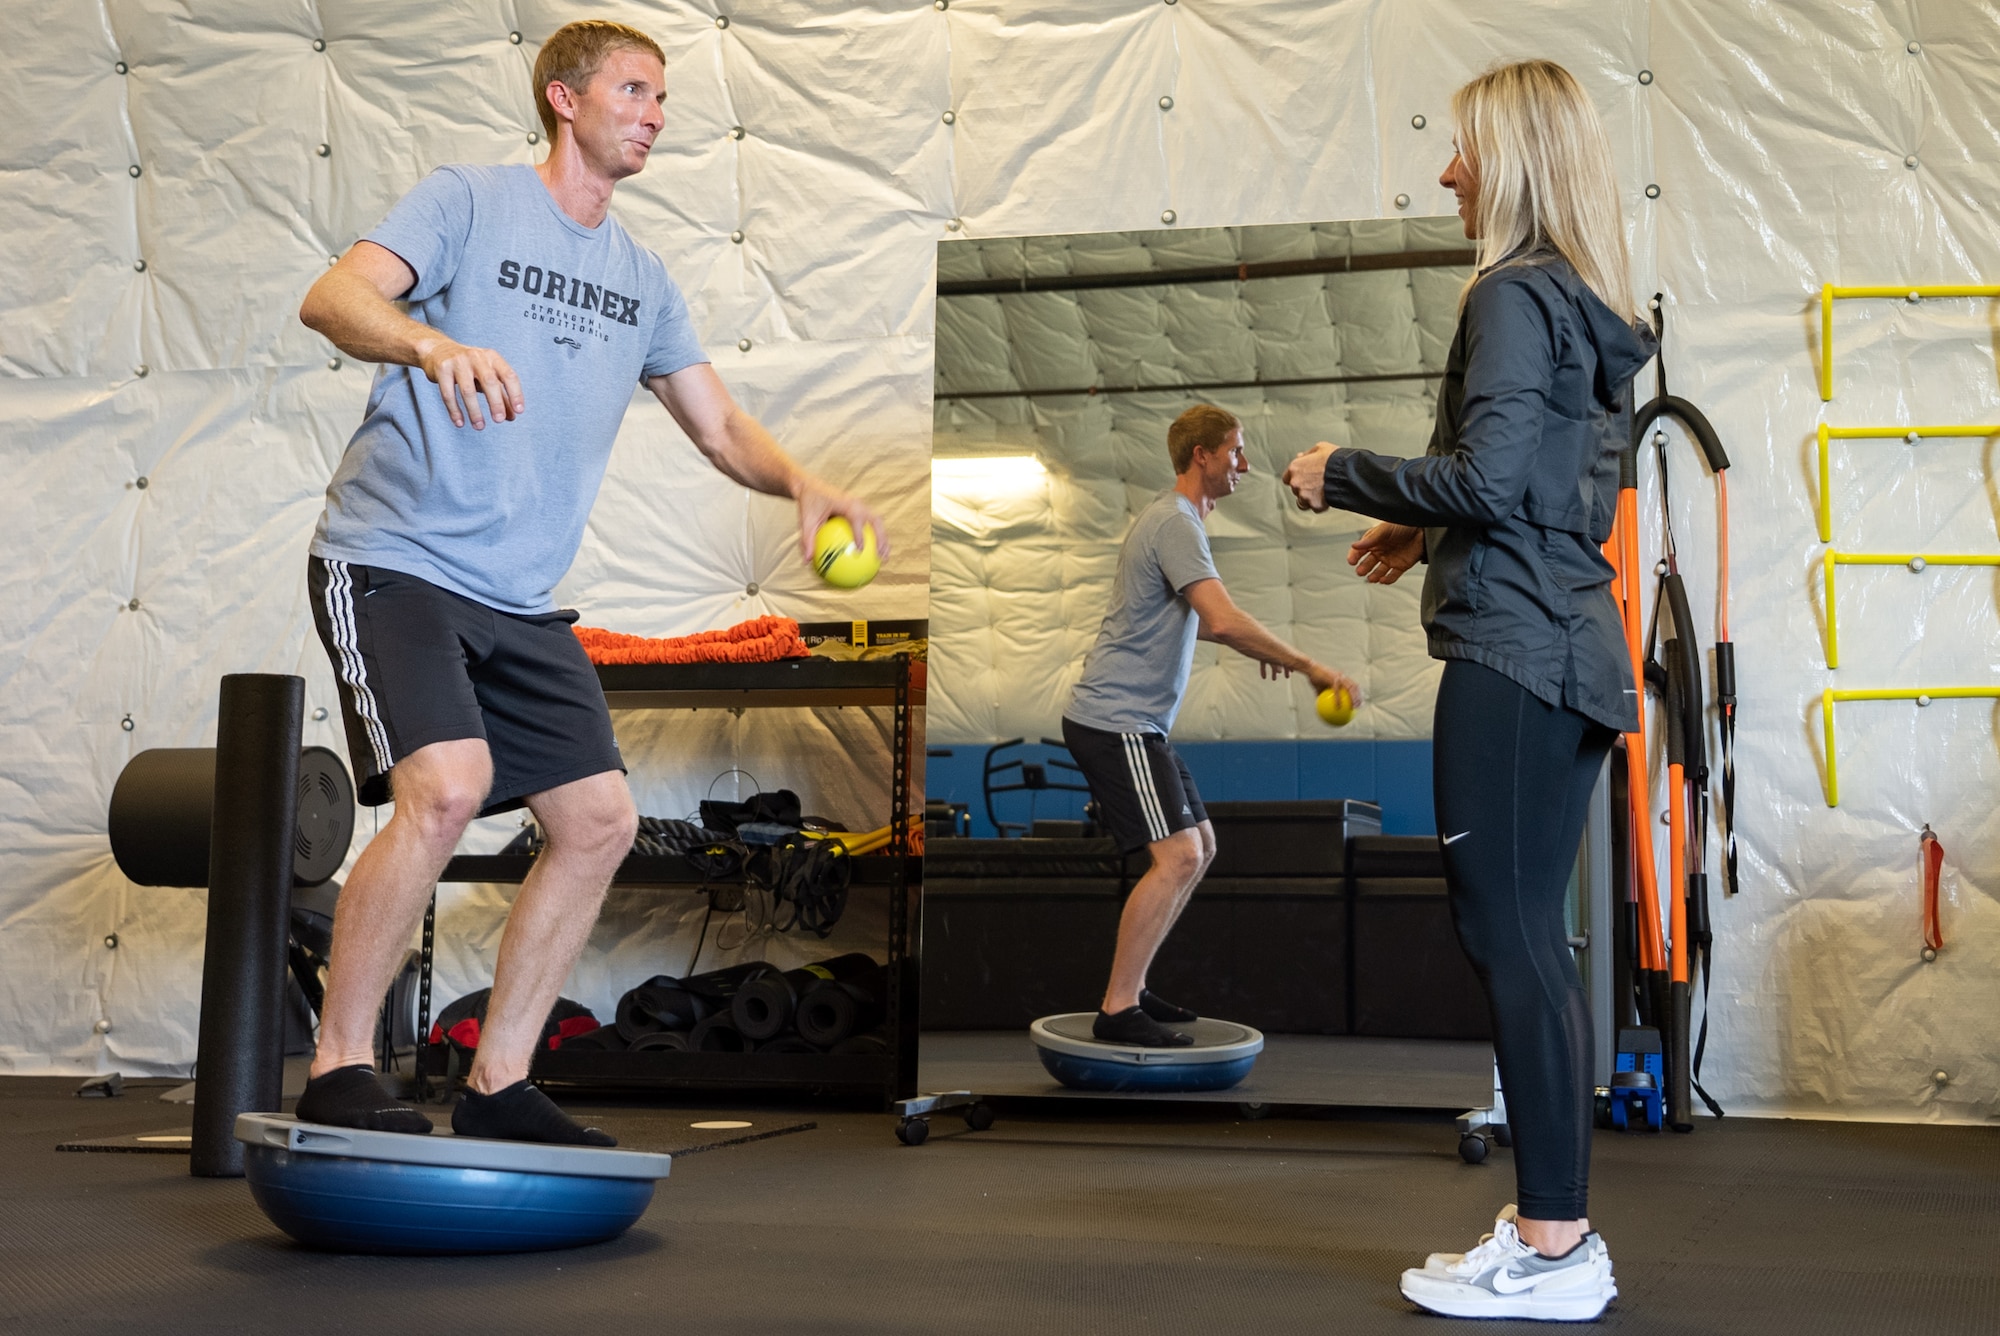 An athletic trainer performs a proprioceptive drill with another certified athletic trainer.